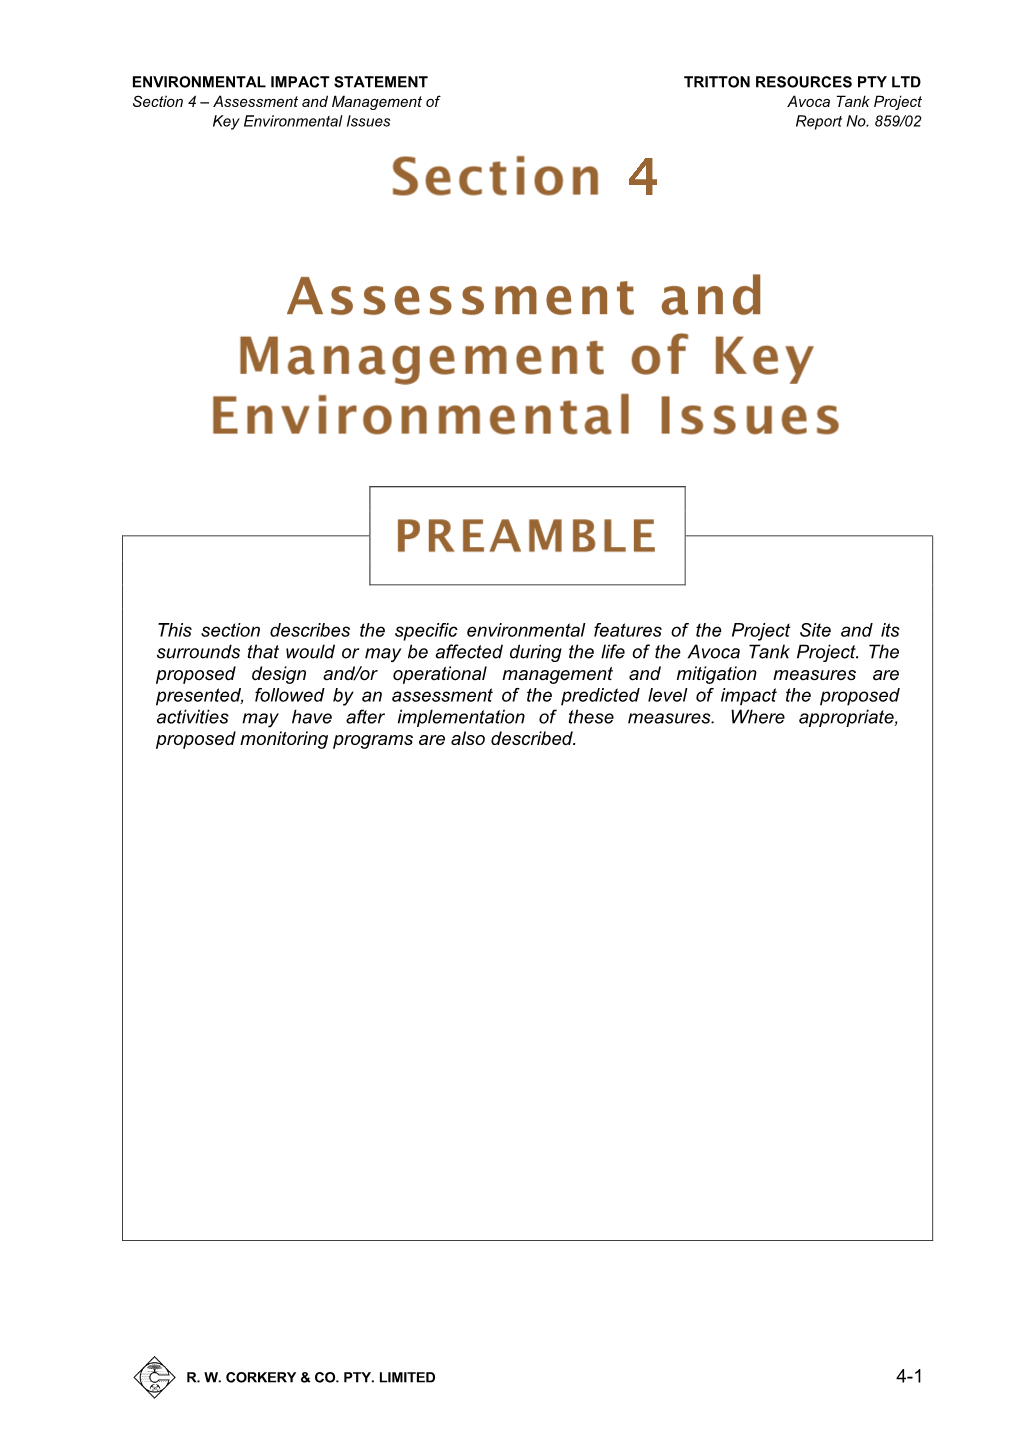 Assessment and Management of Key Environmental Issues